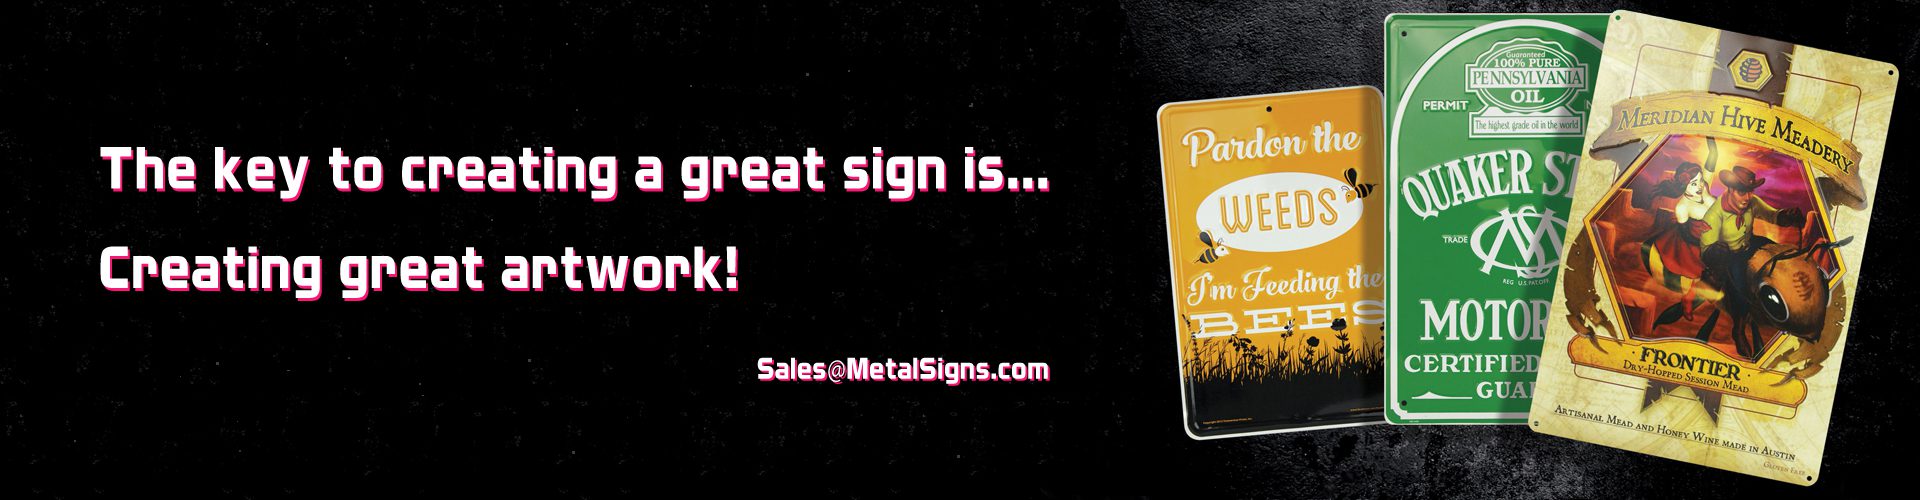 Artwork Information and requirements for ordering custom aluminum signs and plates.